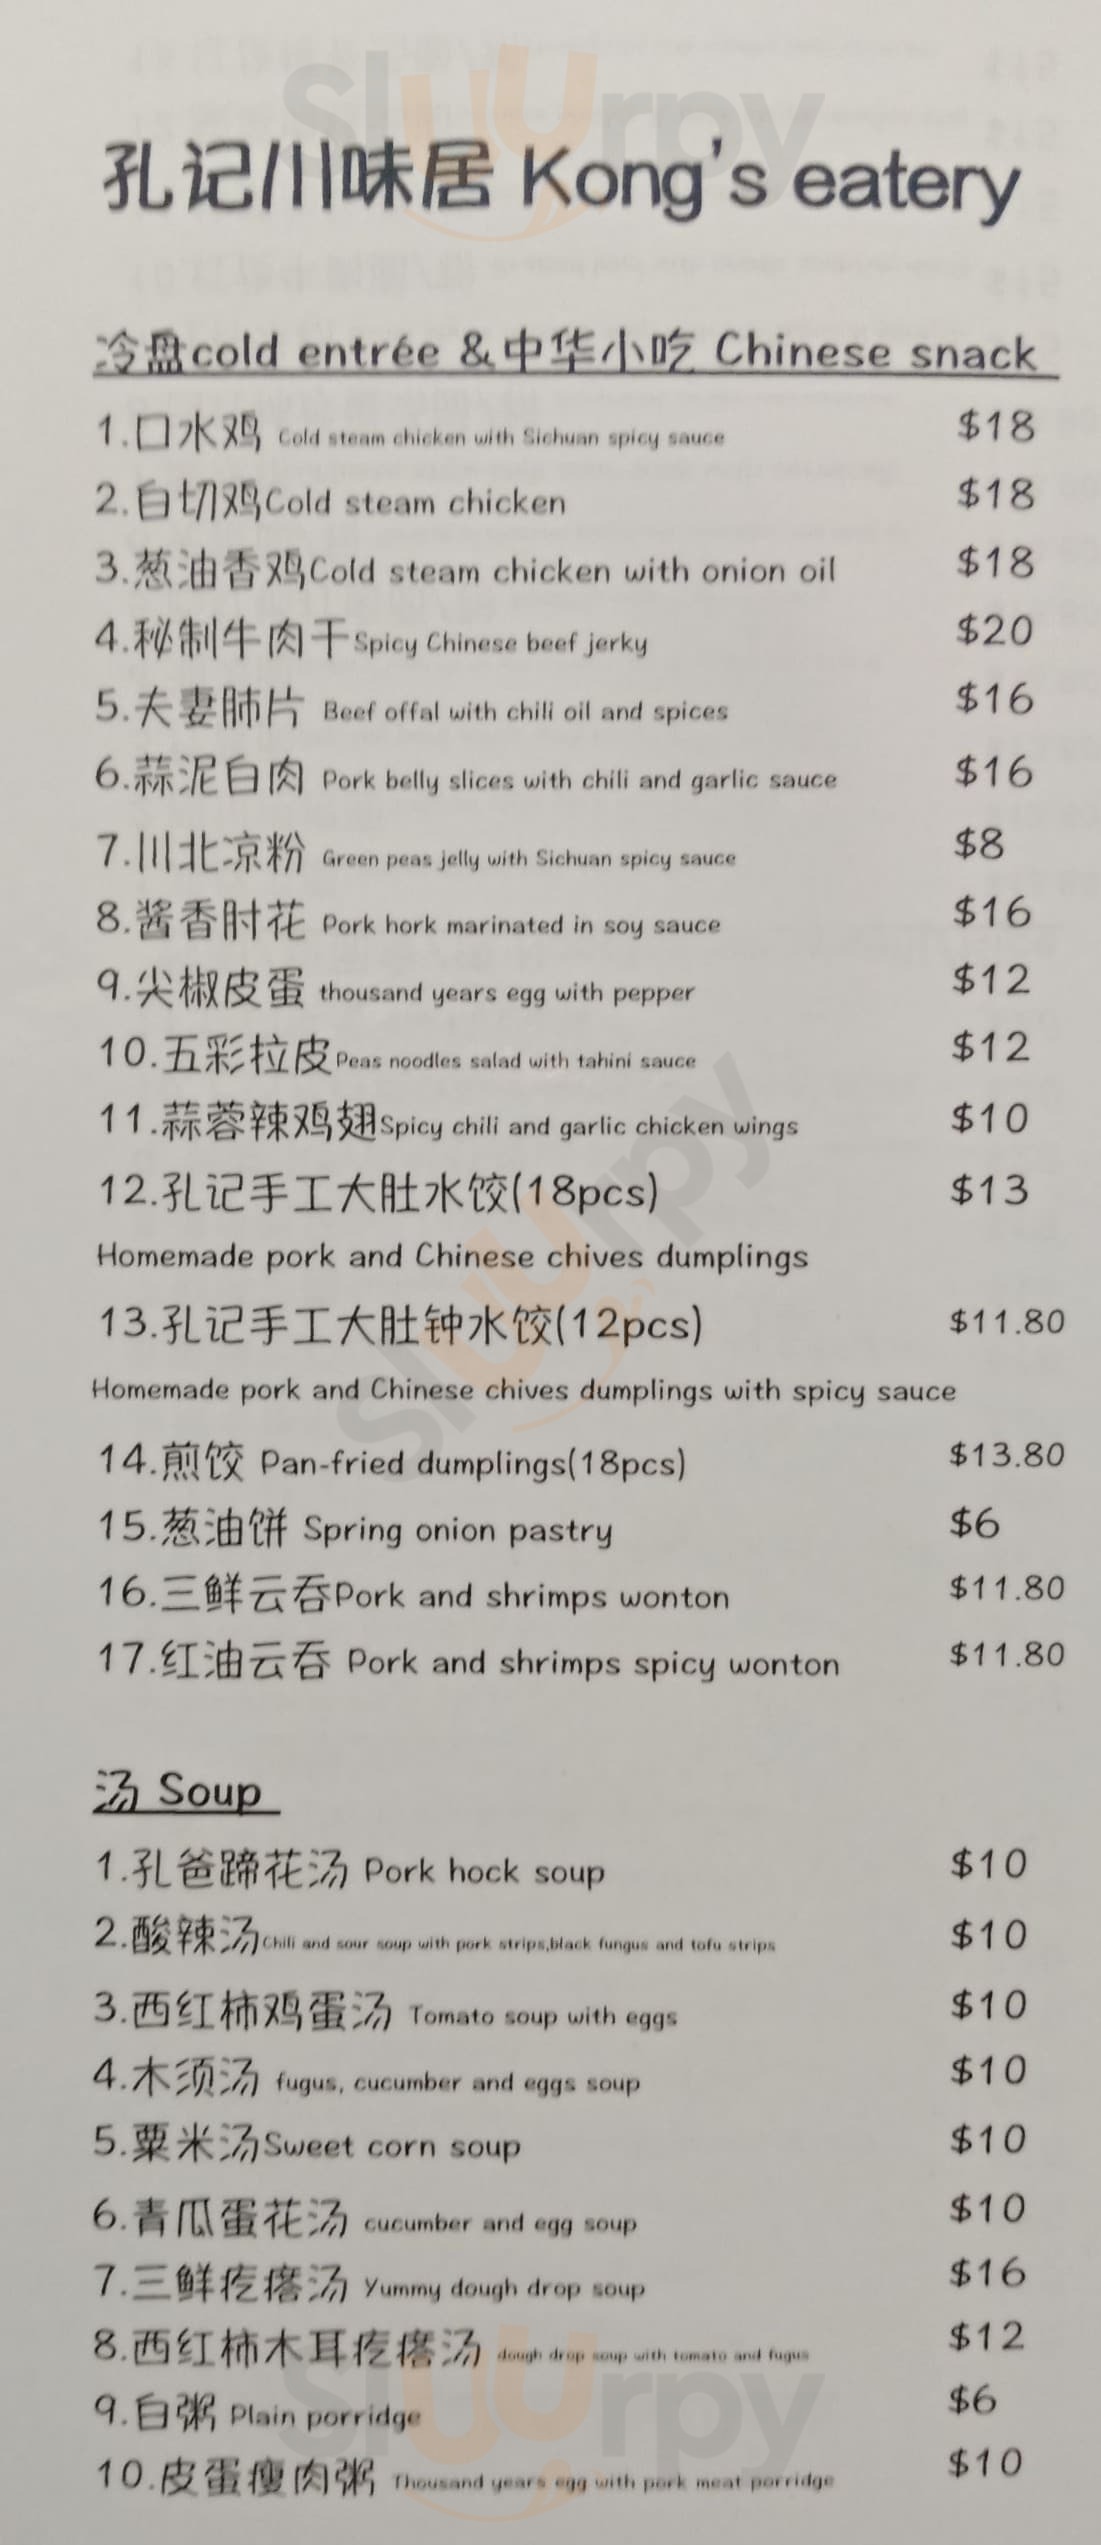 Kong's Eatery Auckland Central Menu - 1